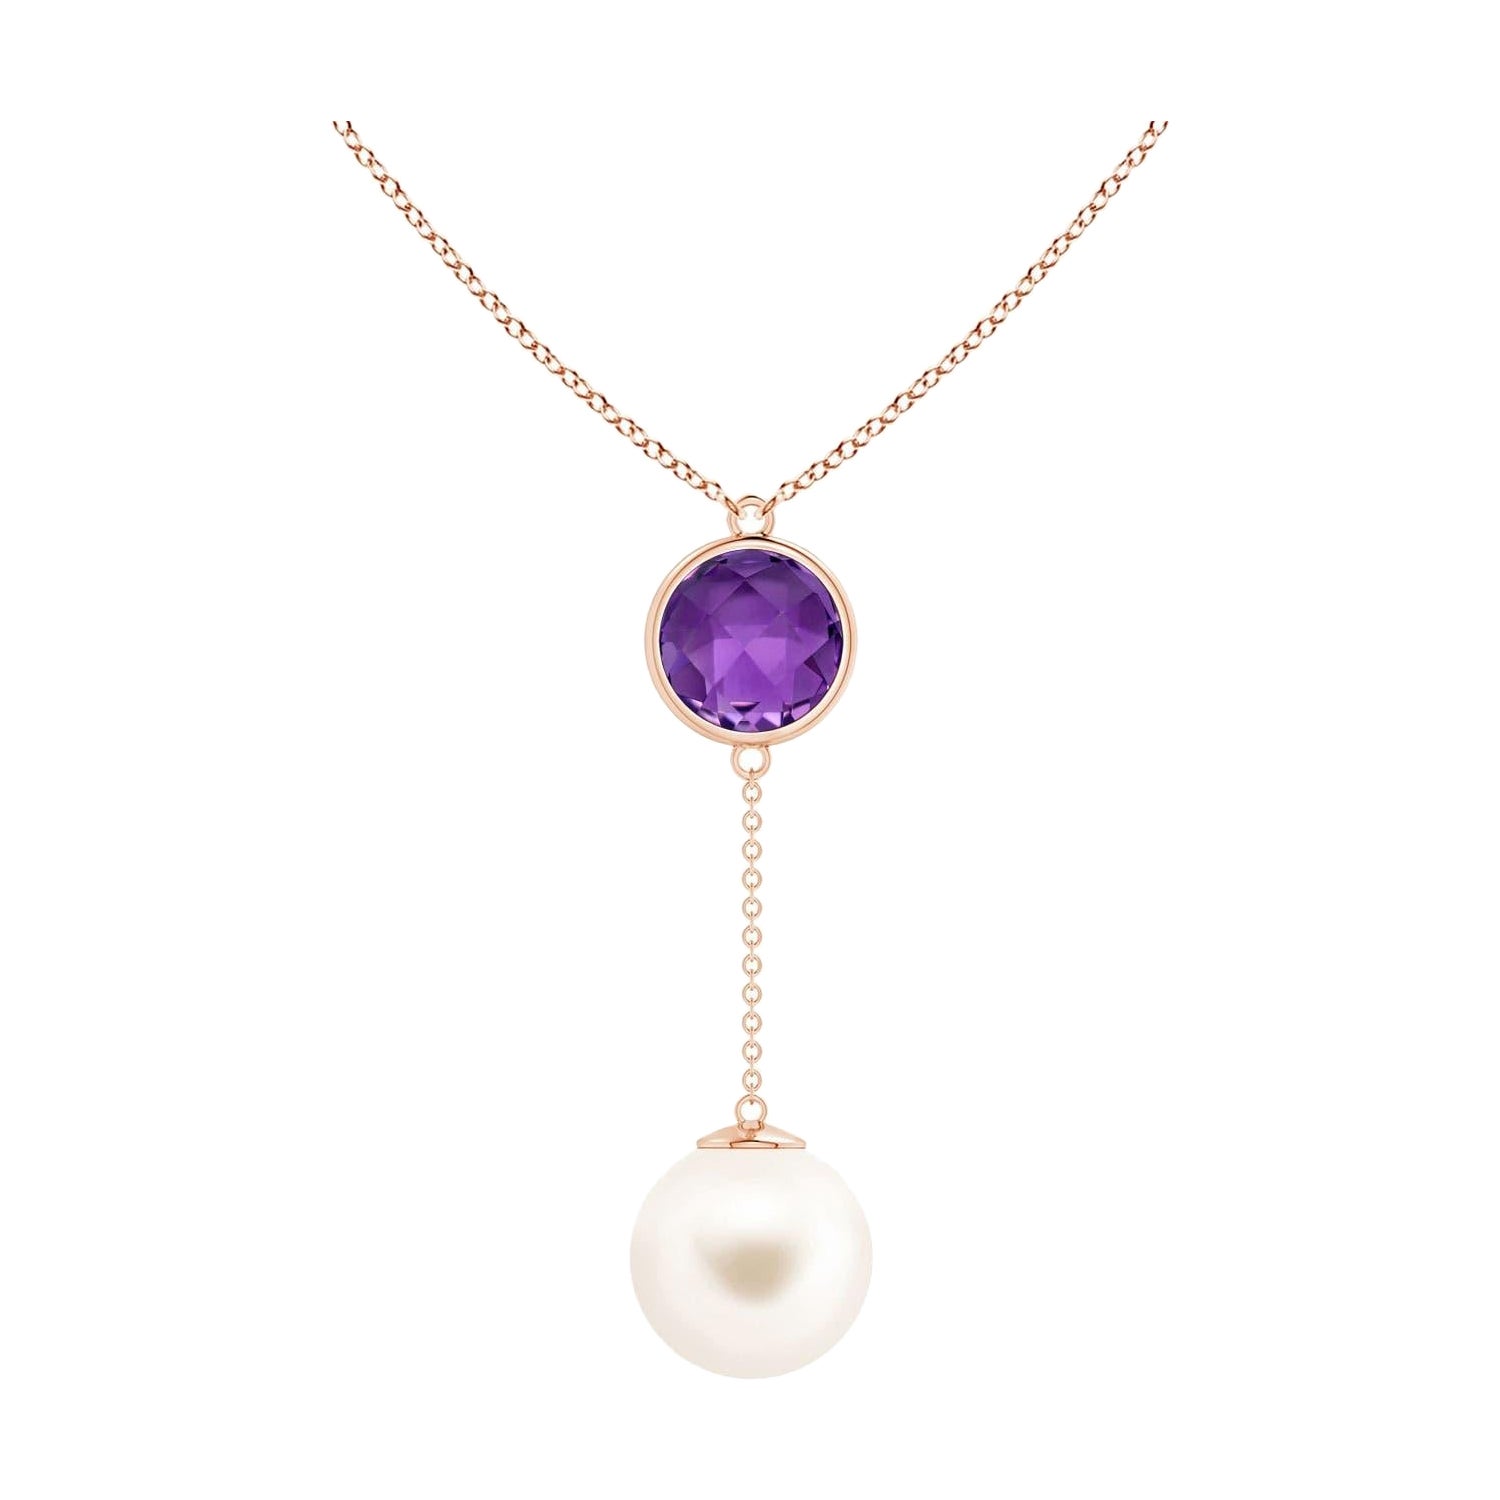 Freshwater Cultured Pearl & 2.85ct Amethyst Lariat Necklace in 14K Rose Gold For Sale